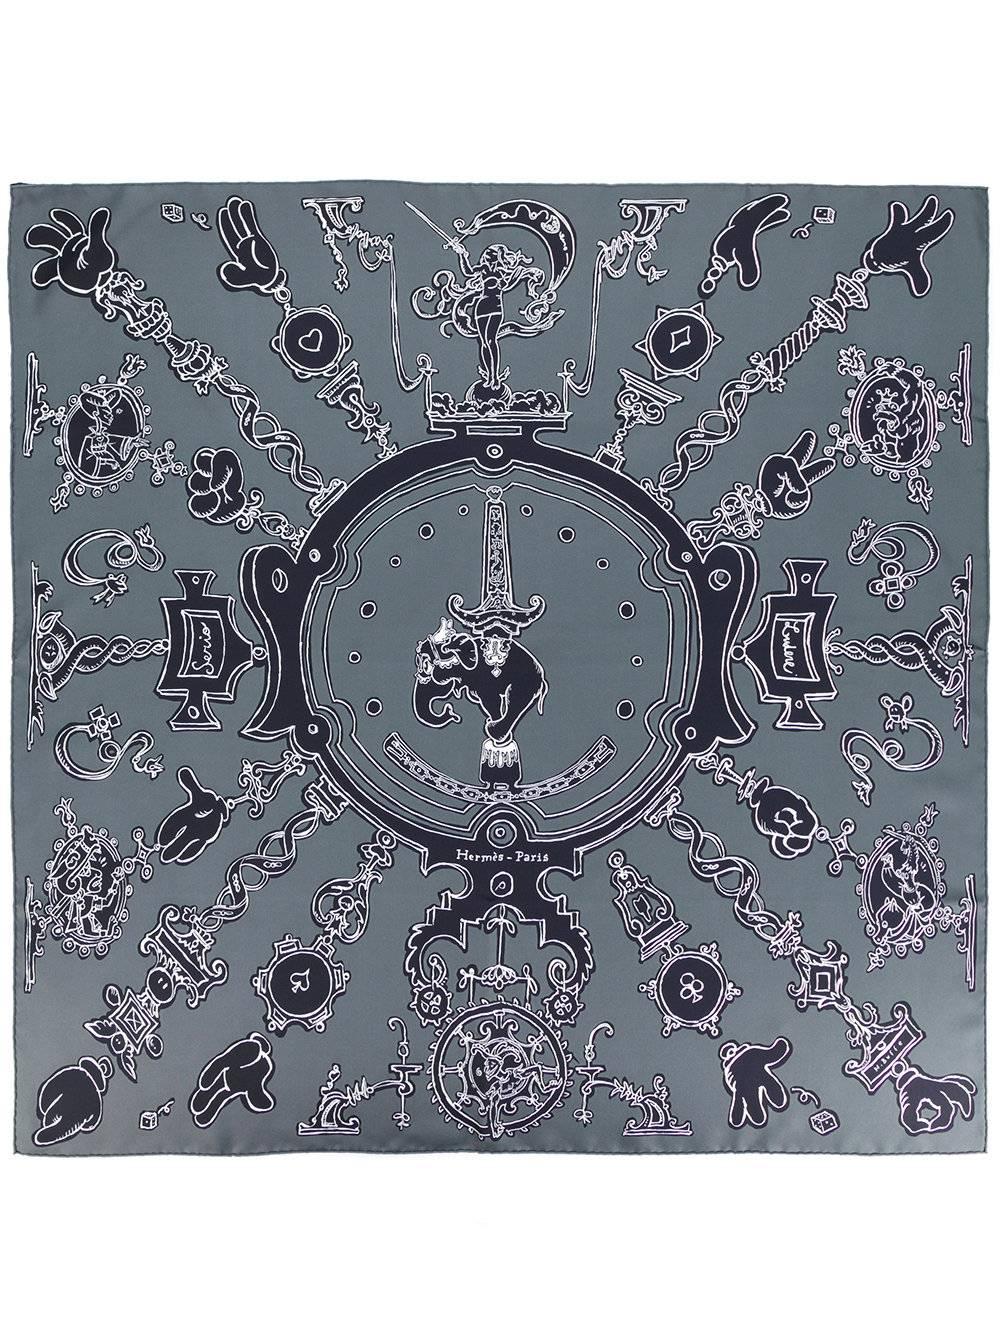 This Hermès silk scarf is printed with illustrations of trinkets and charms, with the brand name written in script. Its neutral tones will blend seamlessly into your wardrobe.

This item includes its original Hermès box.

Colours: Pewter green,